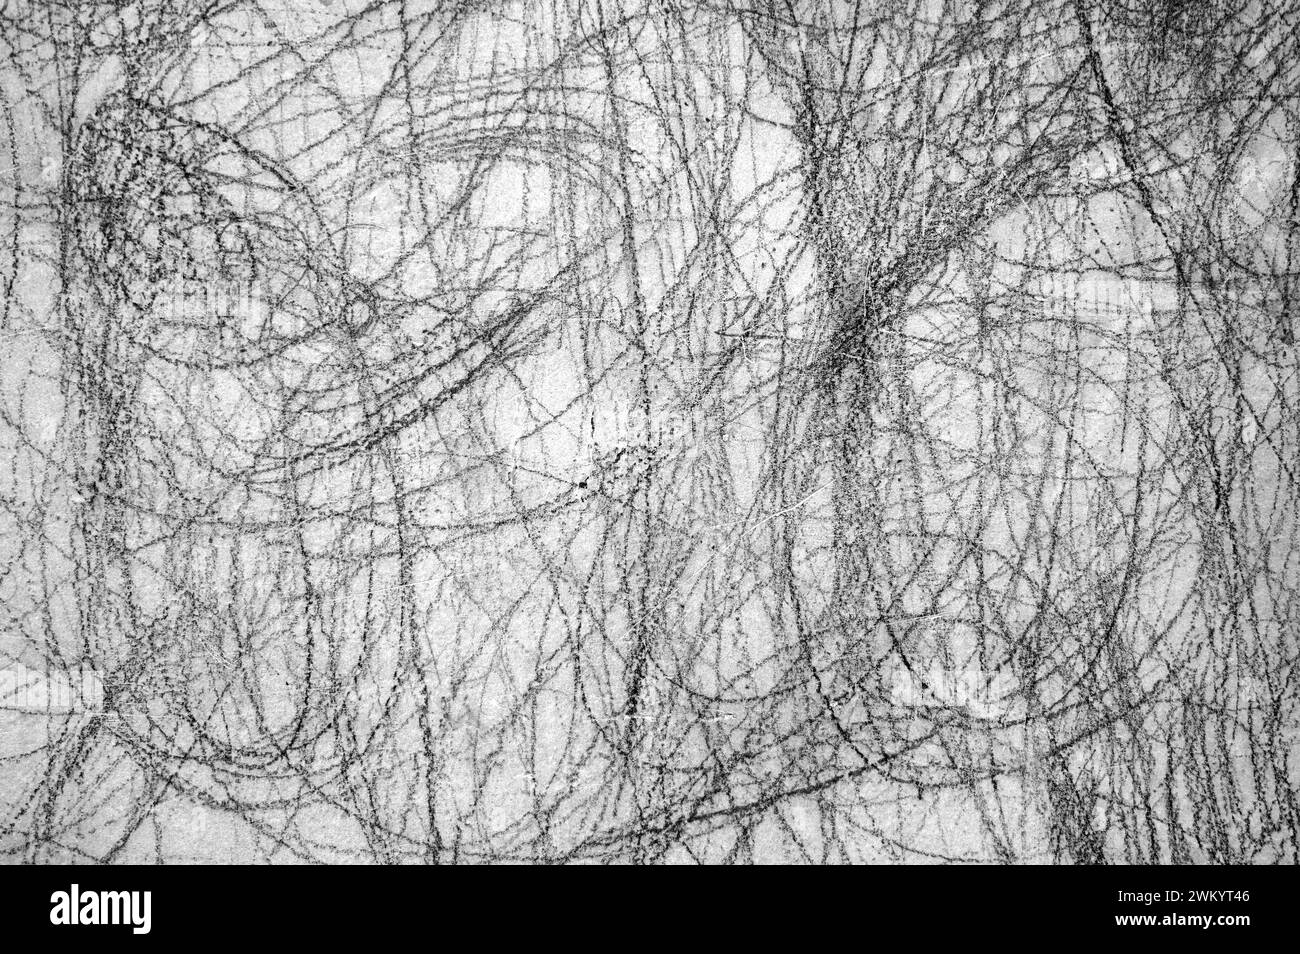 Abstract scribble, scrawl by pencil on the gray wall as texture or background Stock Photo